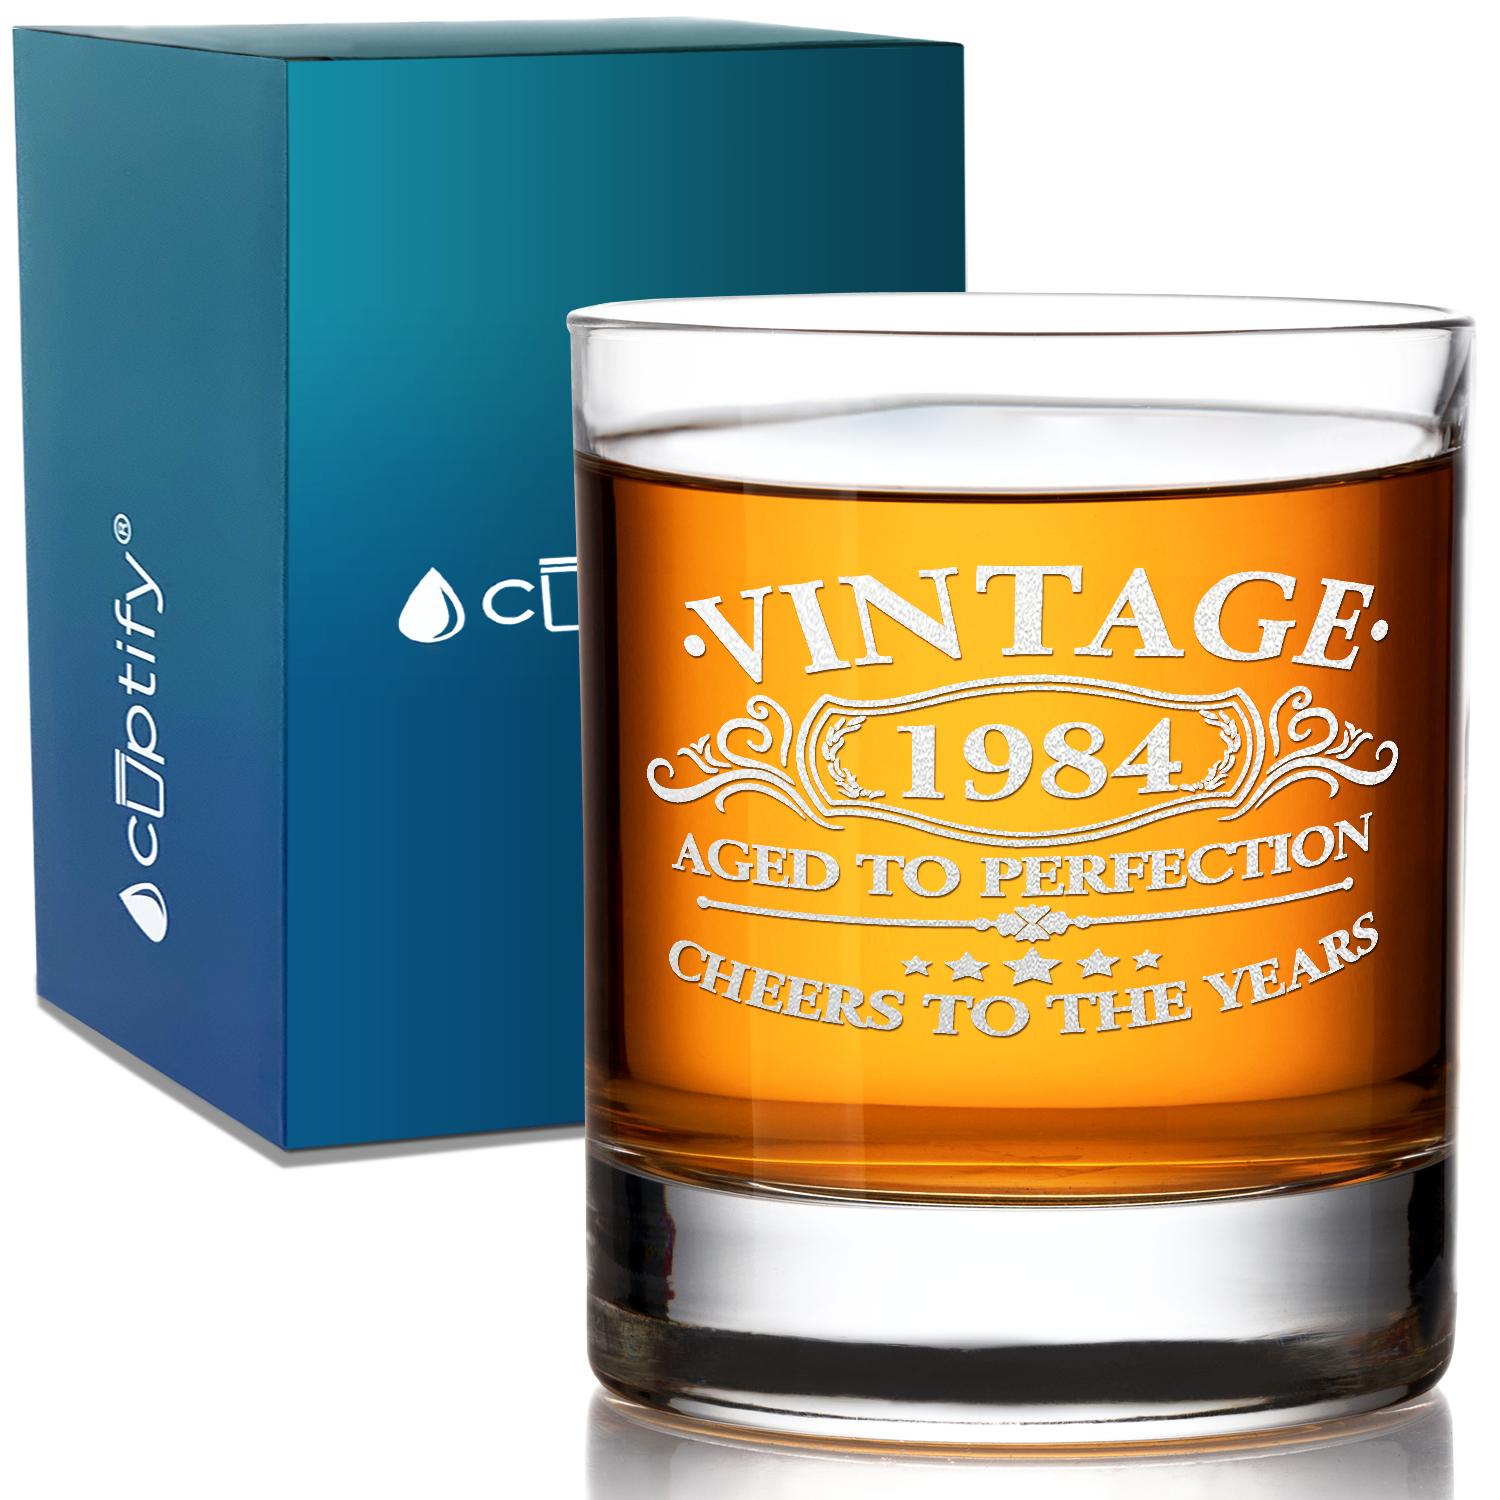 Vintage Aged To Perfection Cheers To 37 Years 1984 Laser Engraved on 10.25oz Old Fashion Glass